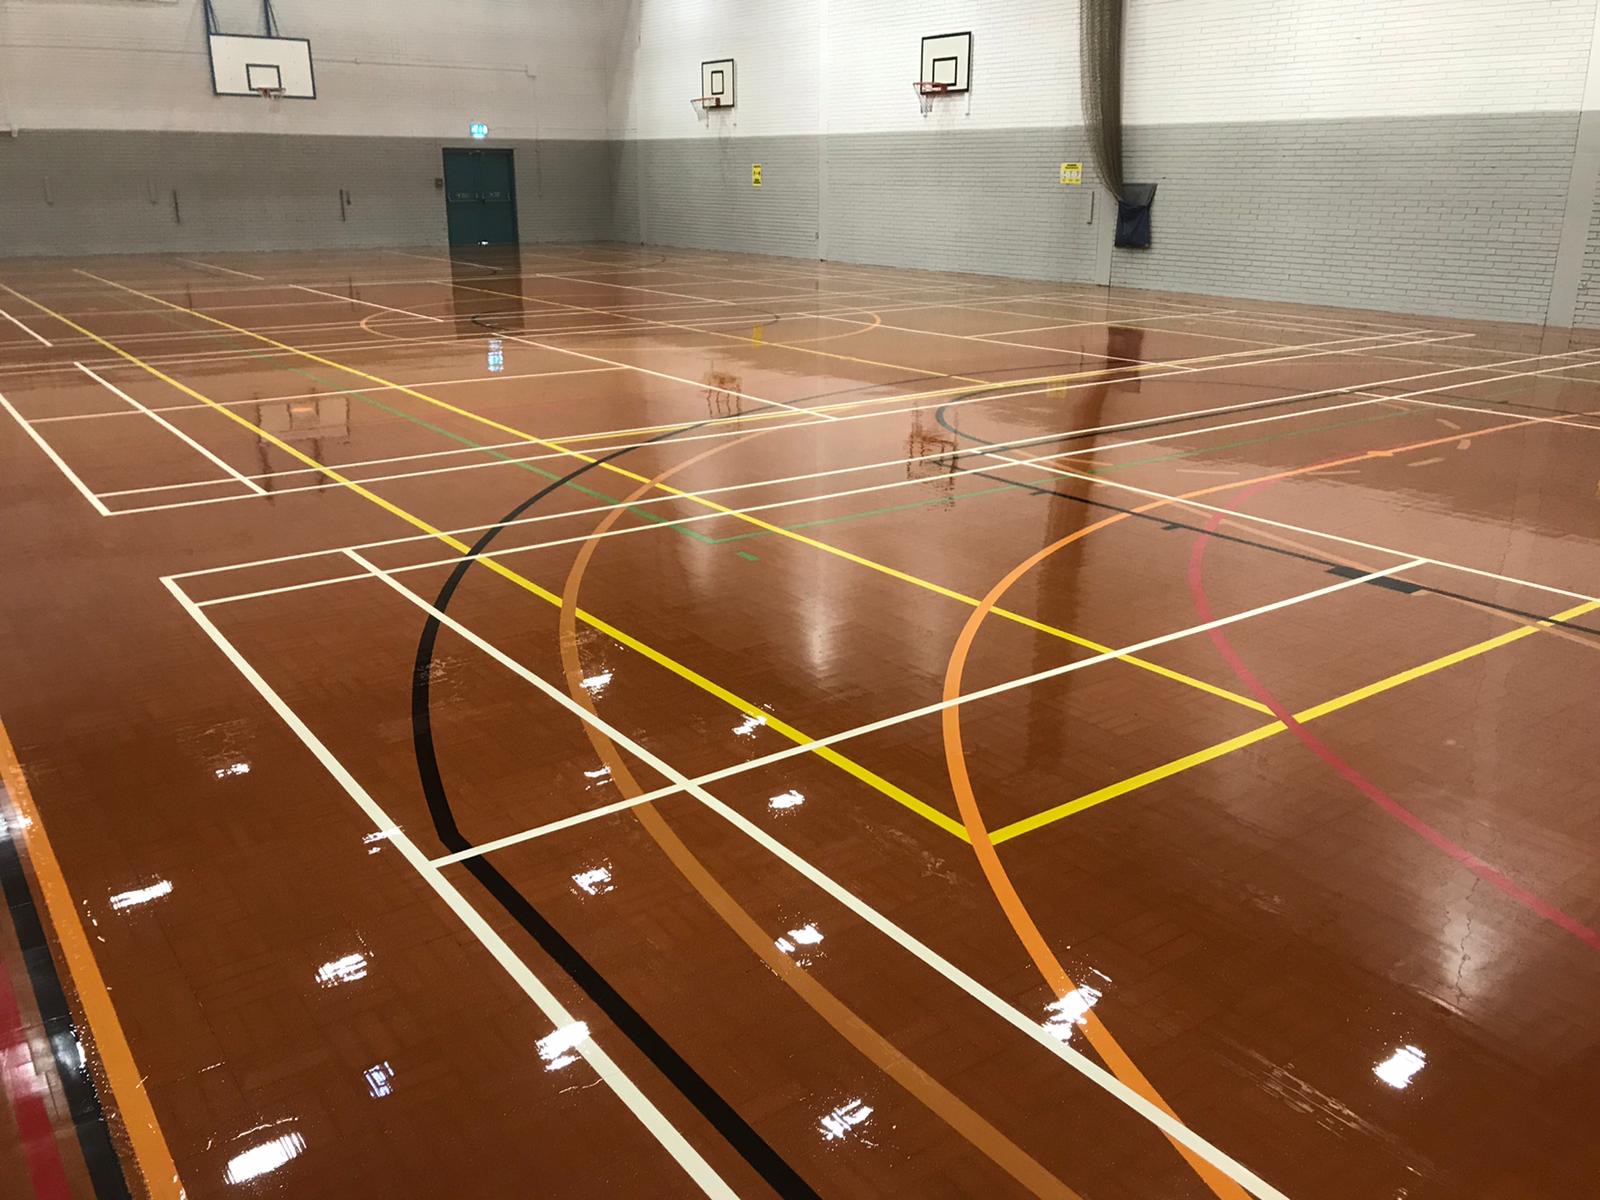 Sharples High School, Bolton – Sand & Seal the existing Granwood floor with new court markings